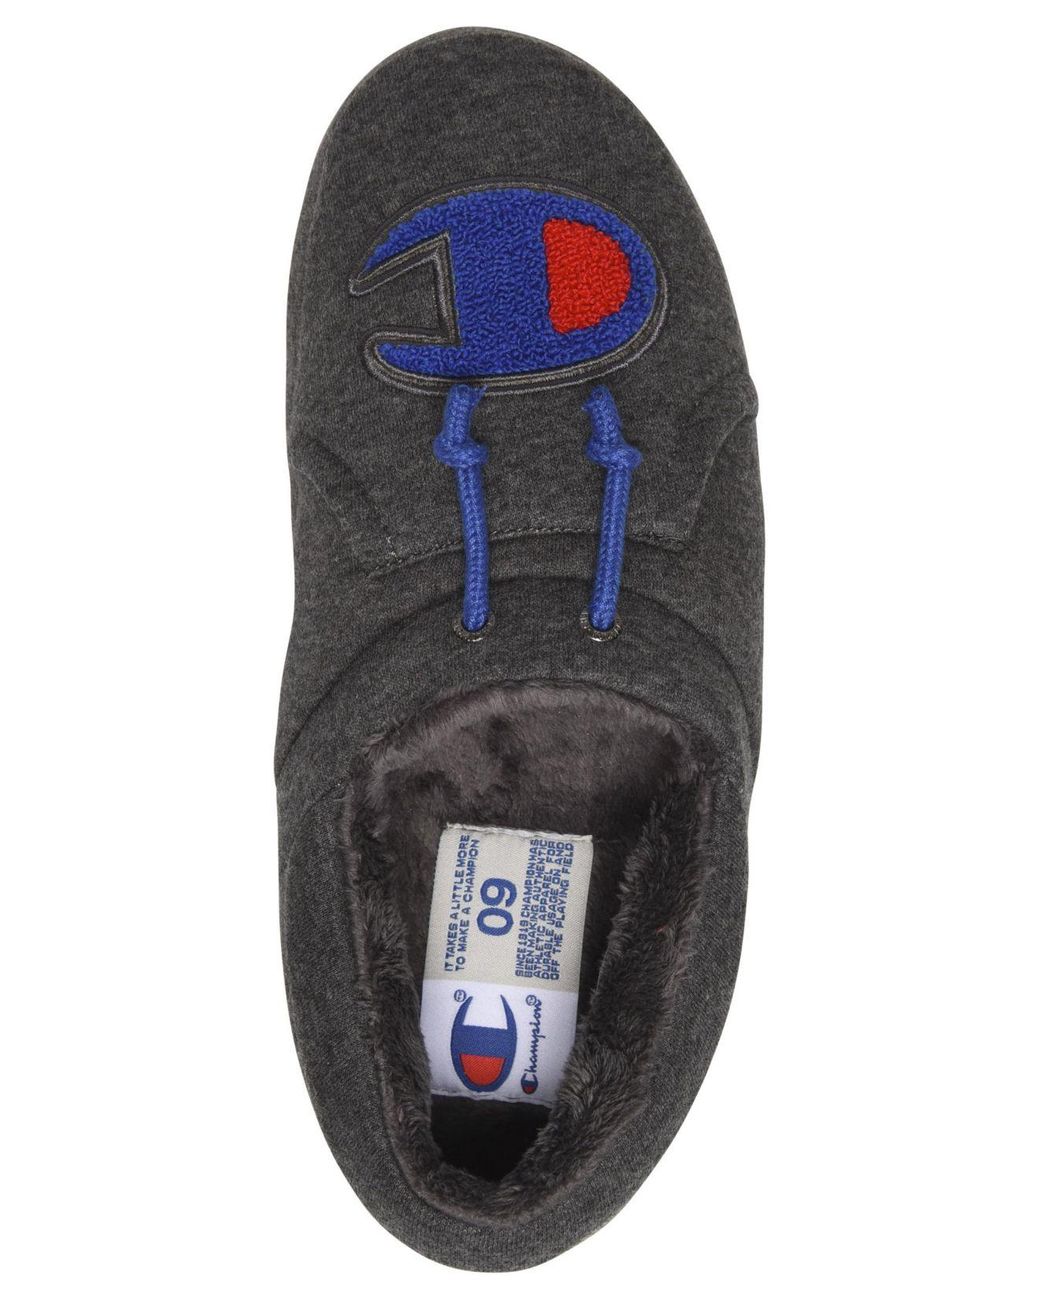 University Slippers From Finish Line 